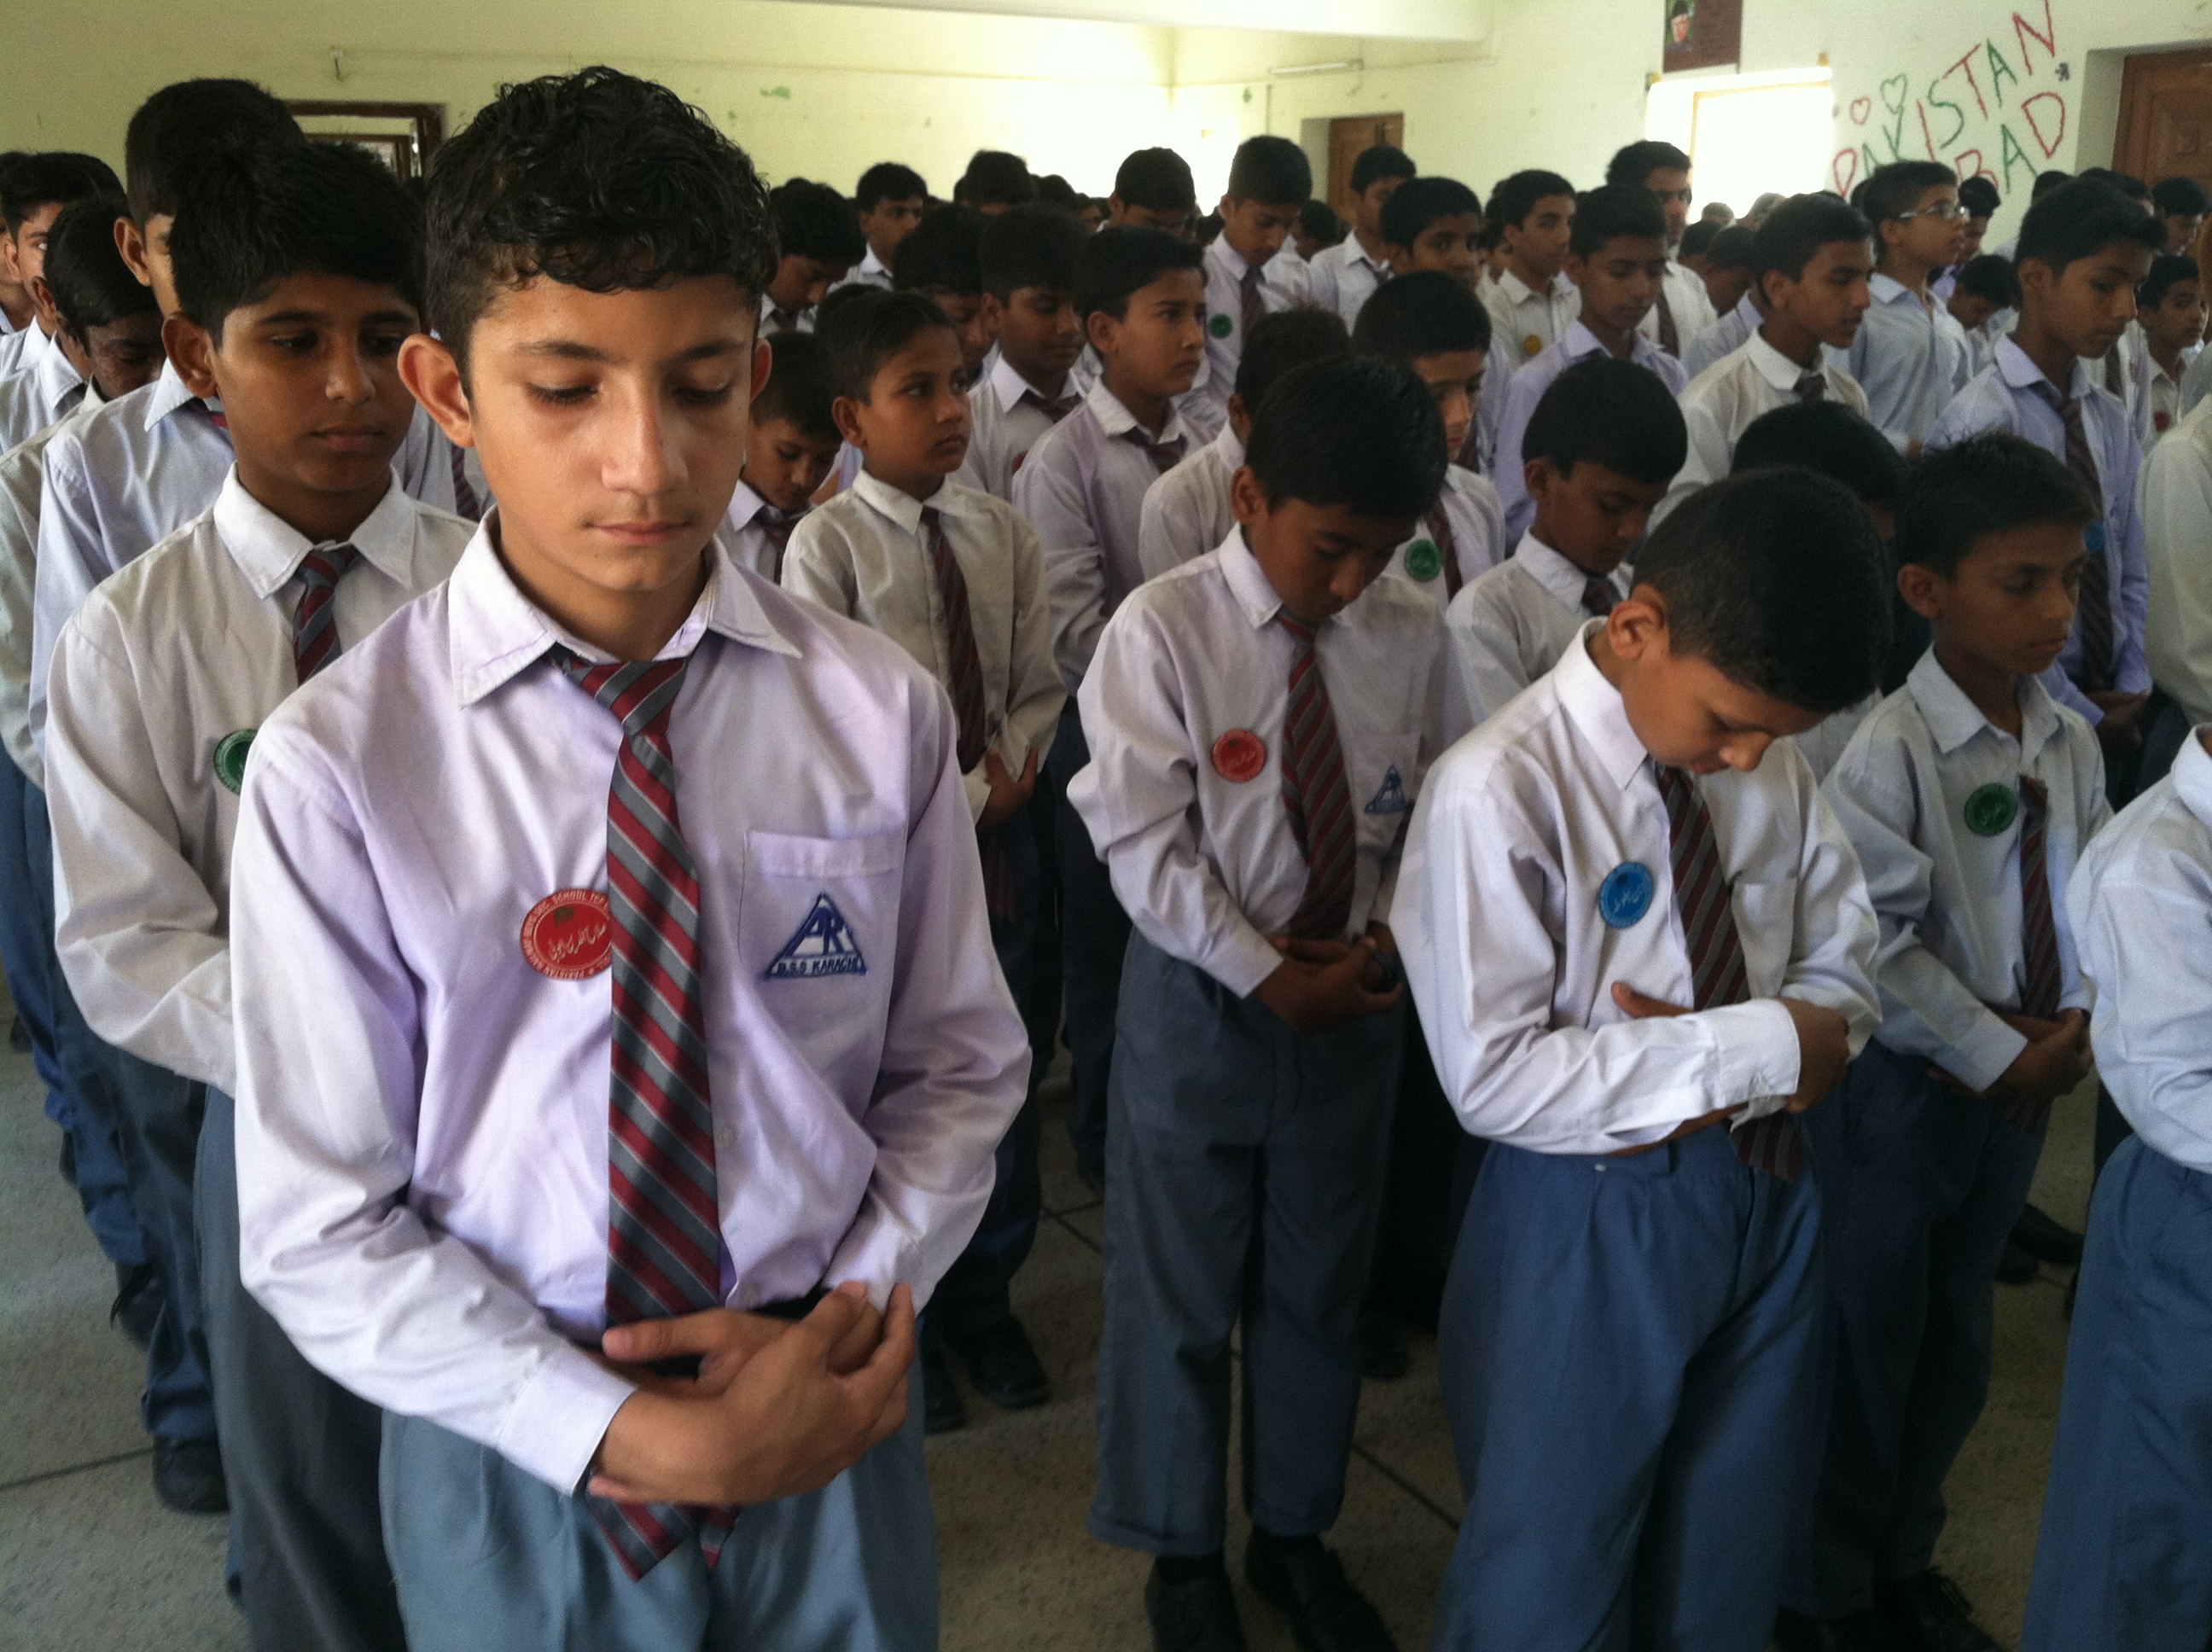 Middle and high school boys line up for the opening assembly with prayer and the pledge of allegiance at the Pakistani Railway School in Karachi, The school was adopted by the nonprofit, The Citizens Foundation, last year and has already seen a jump in test scores.